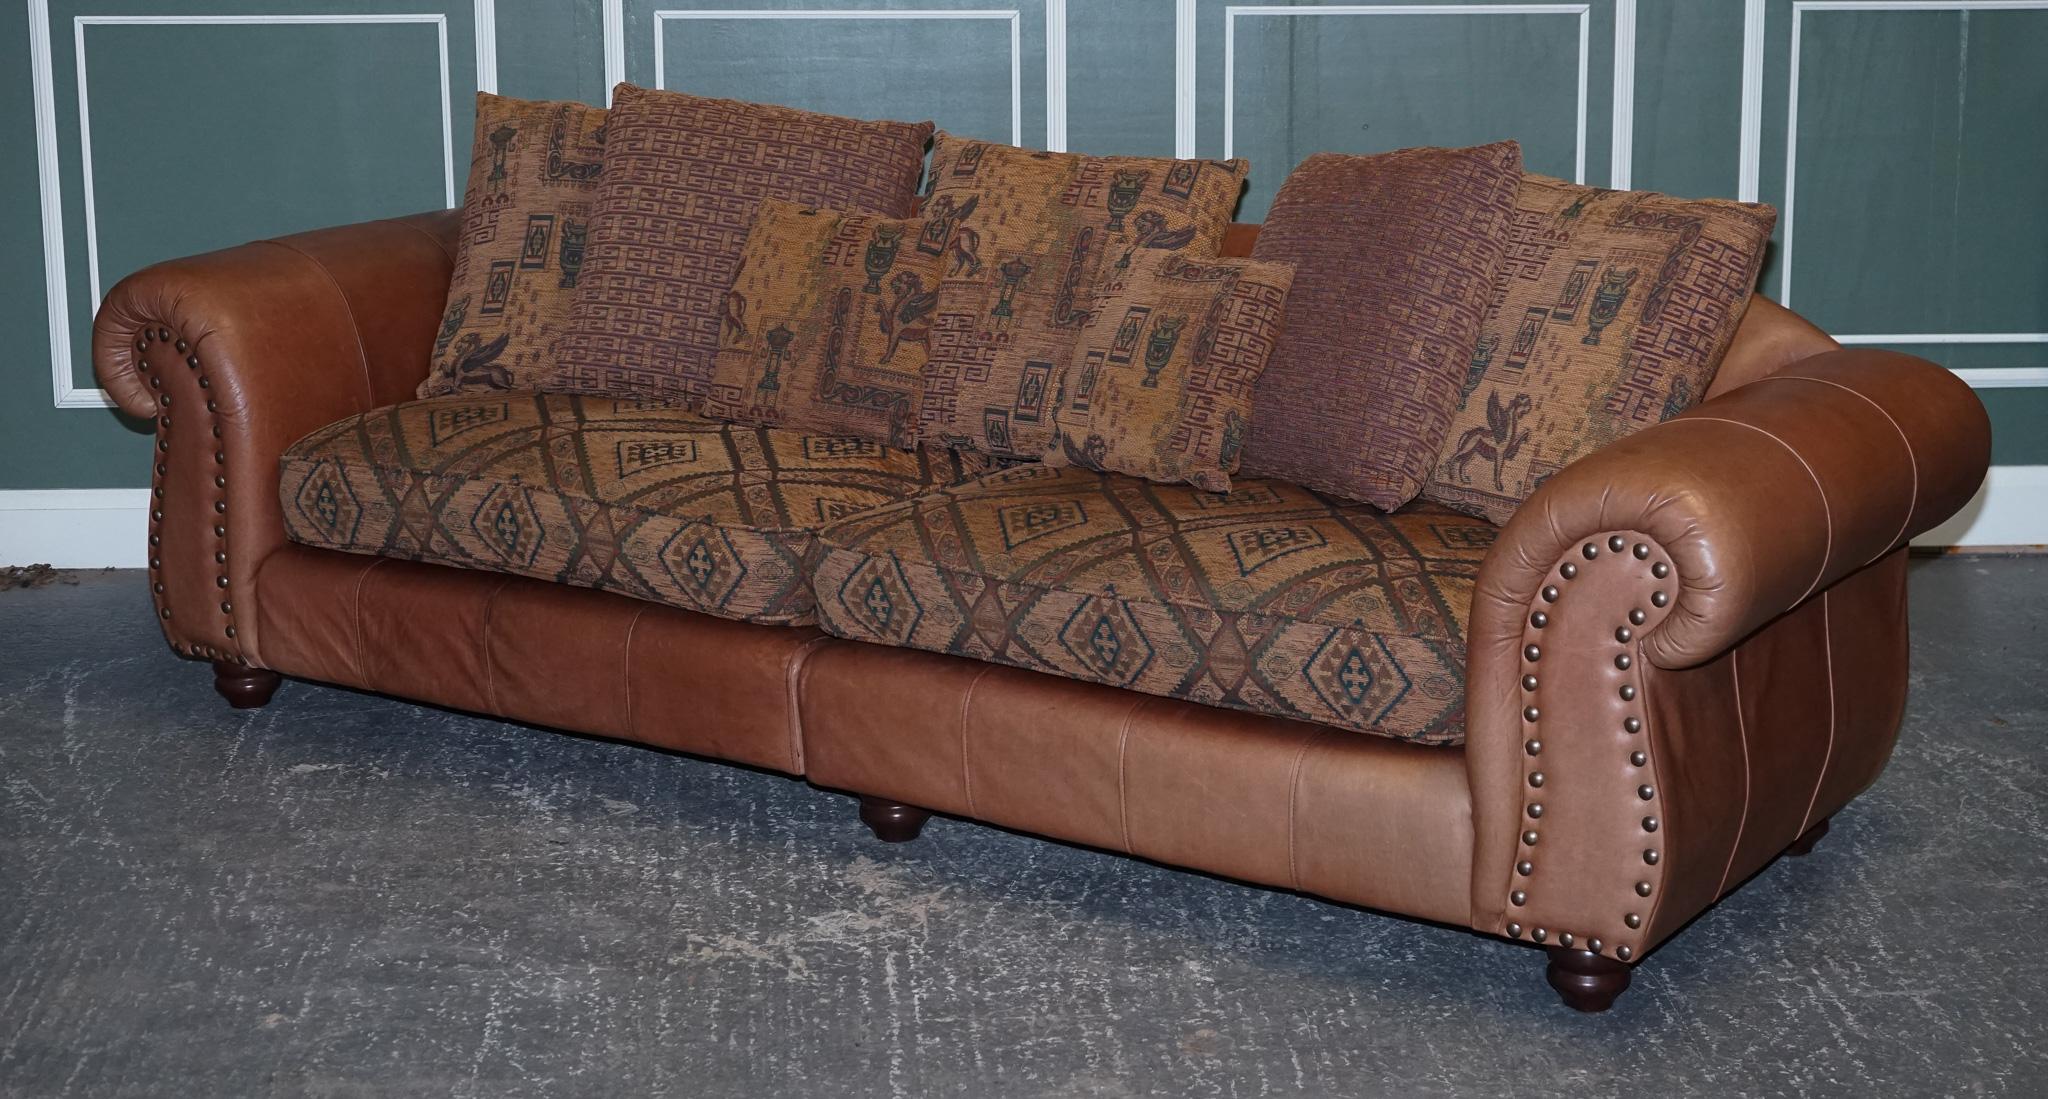 We are delighted to present this sStunning Thomas Lloyd lather with Egyptian Pattern Fabric grand sofa.

We have deep cleaned the sofa throughout, hand waxed and hand polished the leather.

Condition-wise, there will be some patina and cosmetic